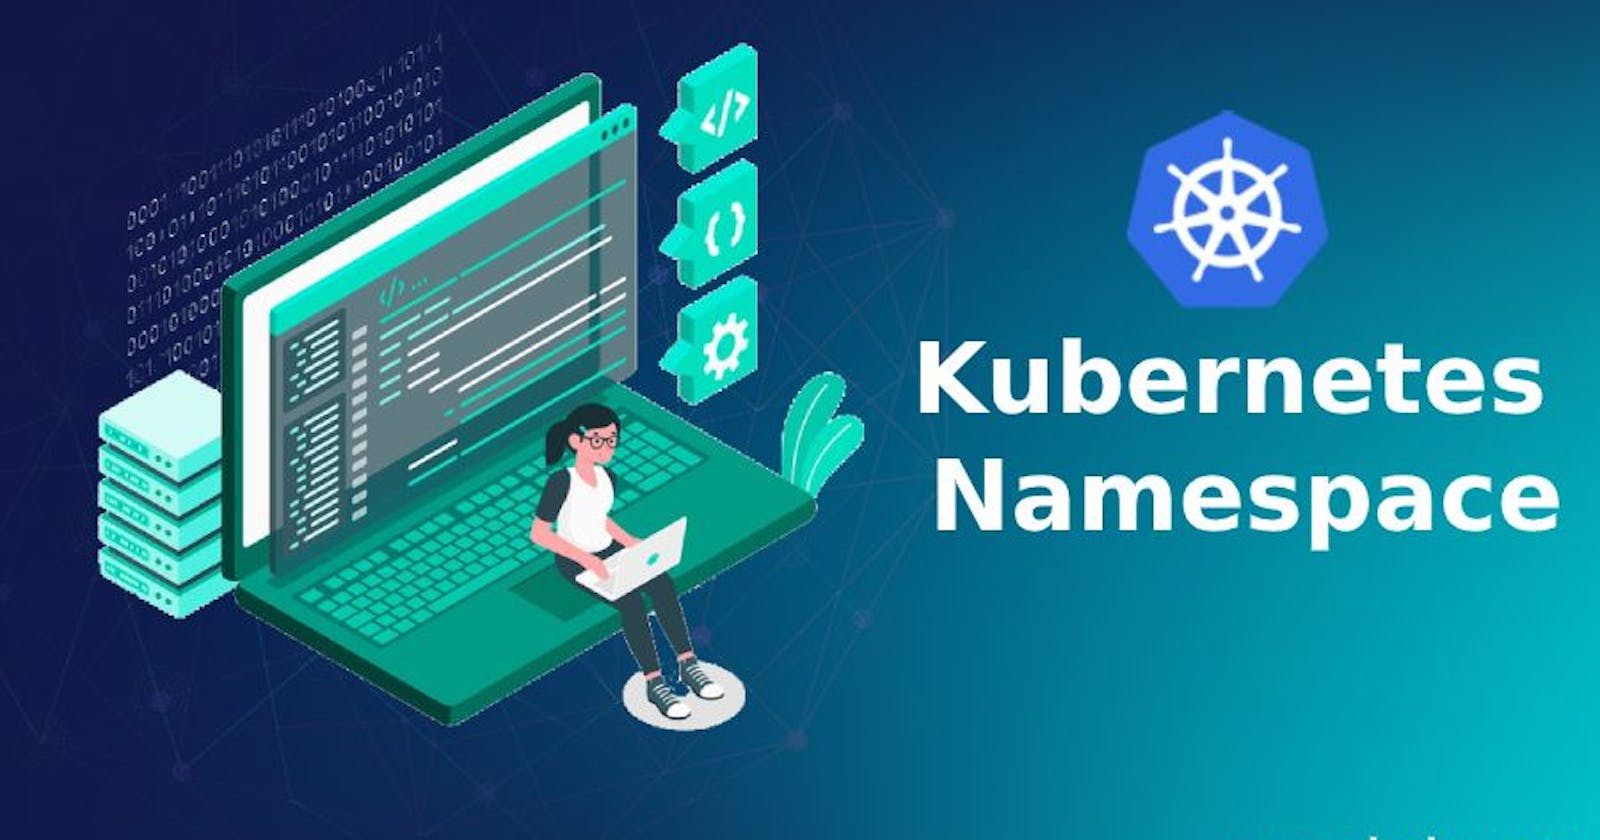 Day 33 - Working with Namespaces and Services in Kubernetes